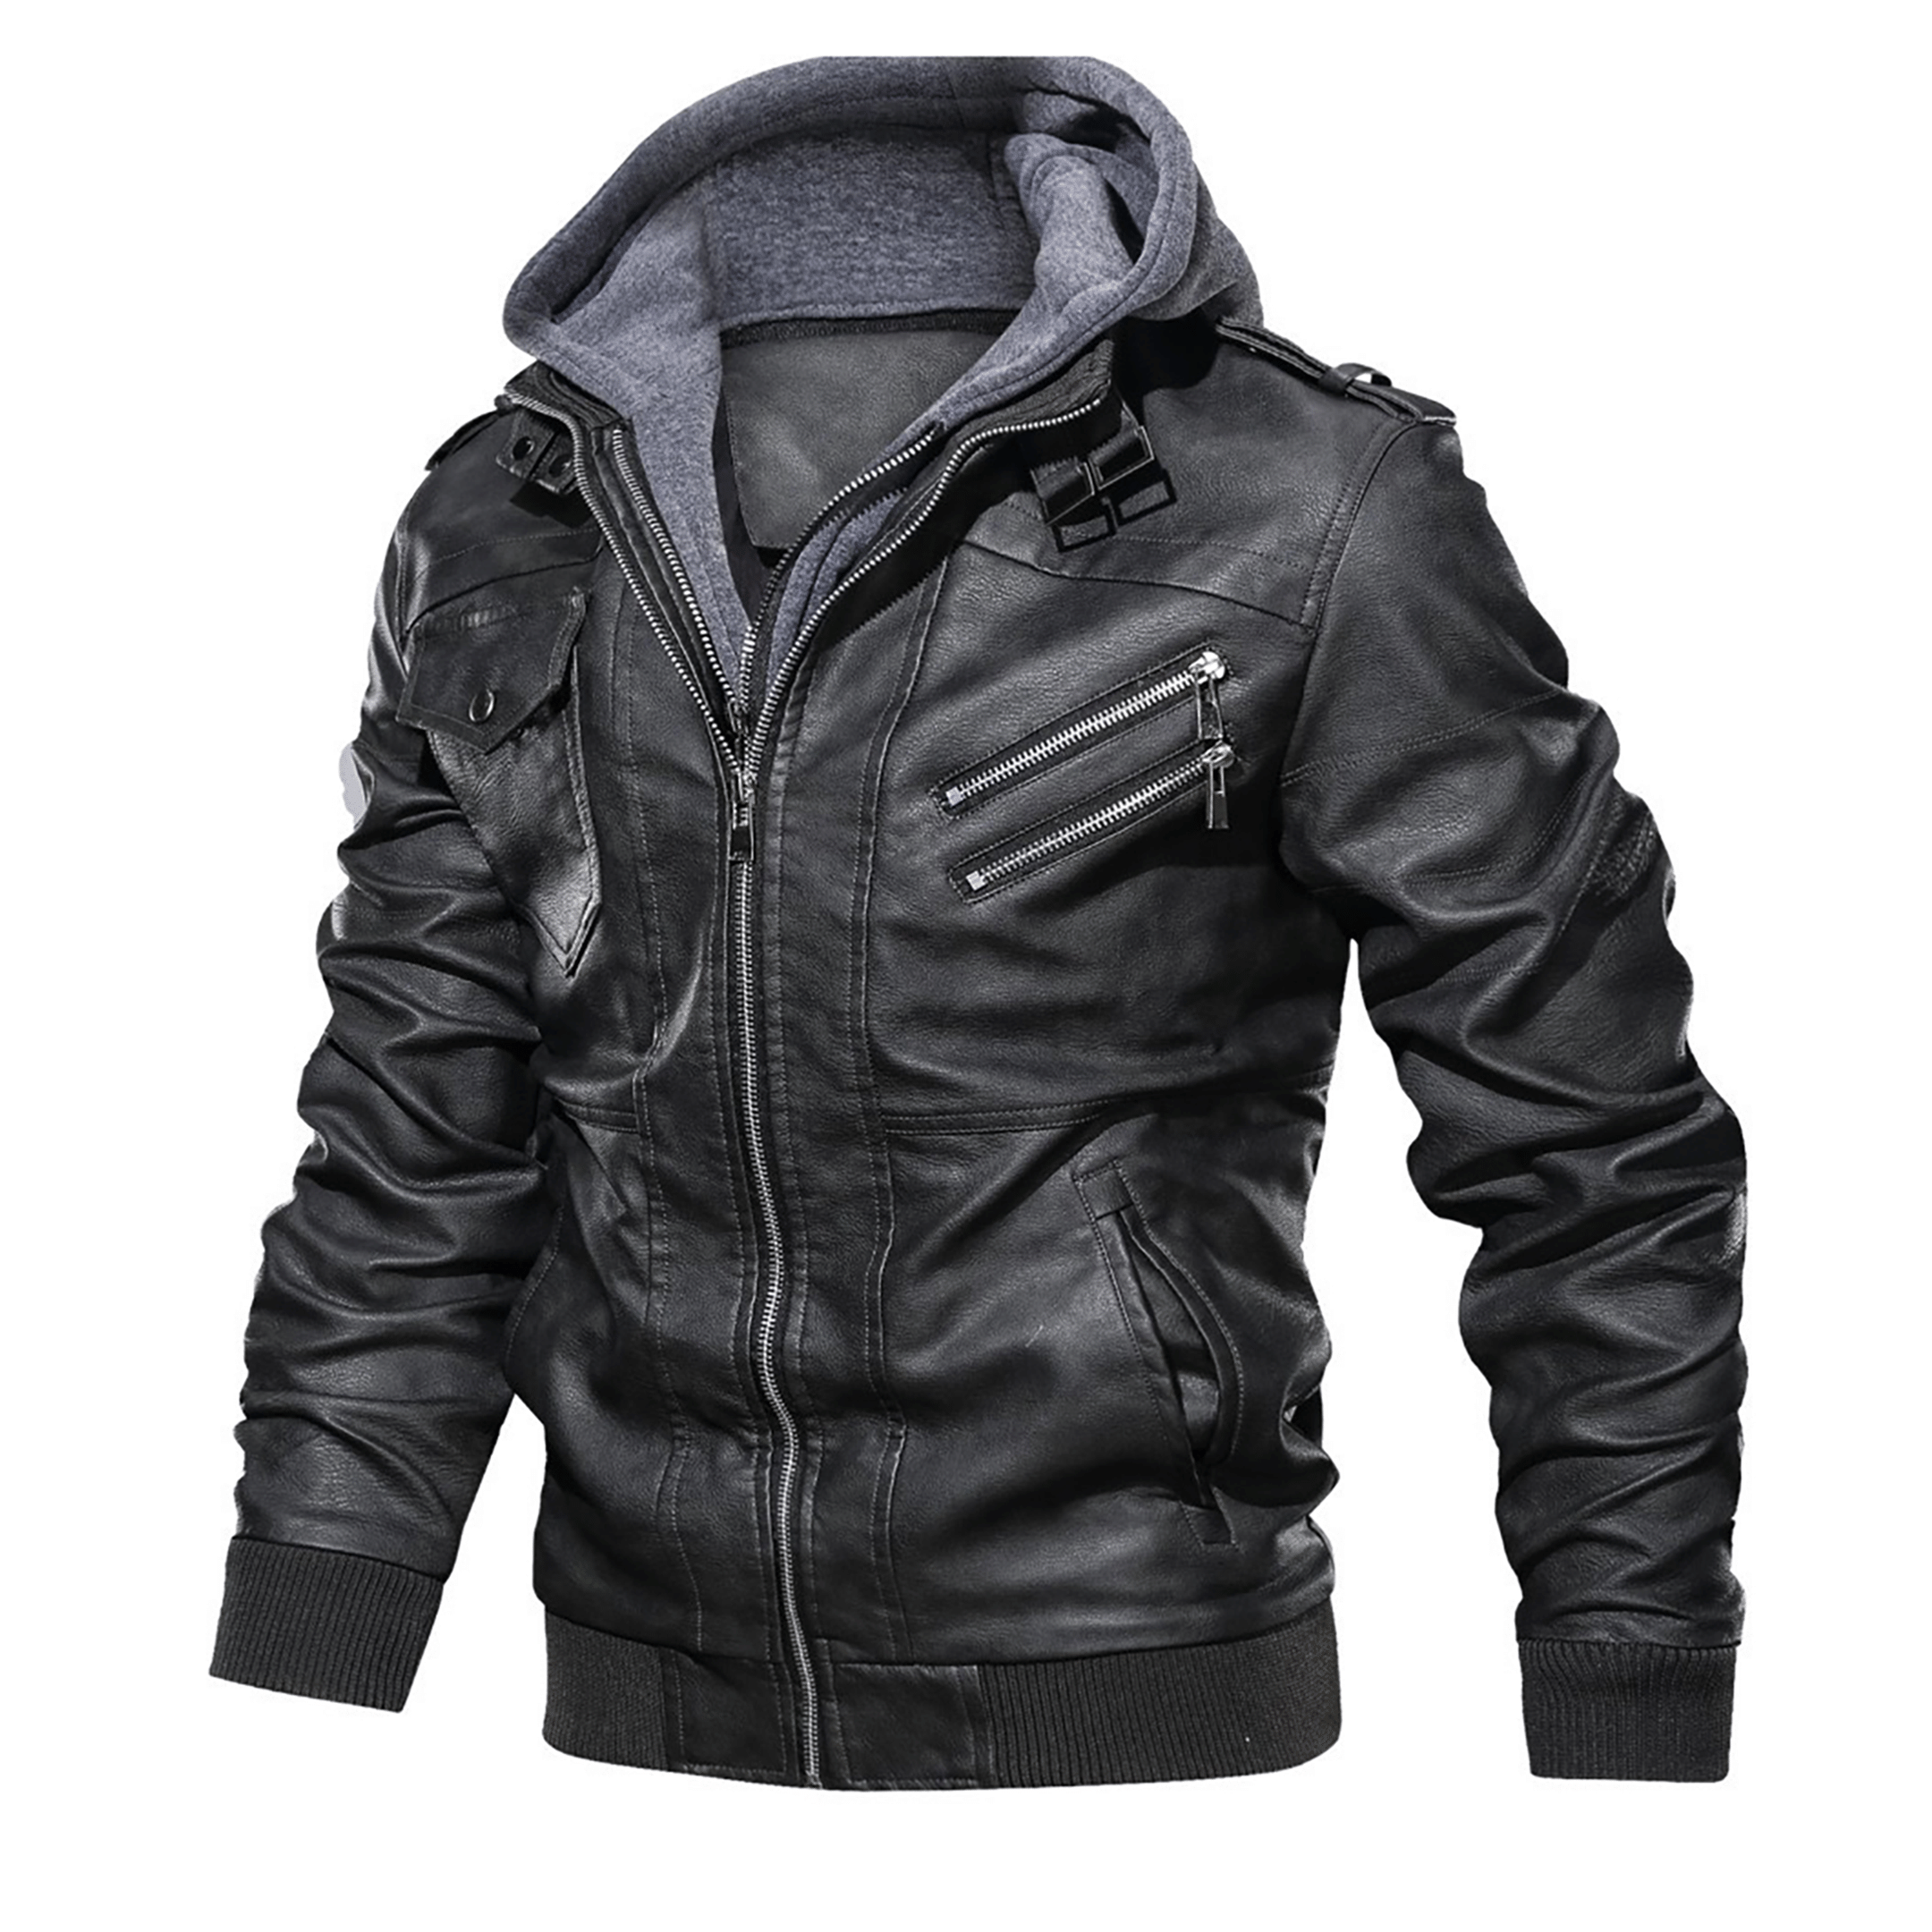 Top leather jackets and latest products 249